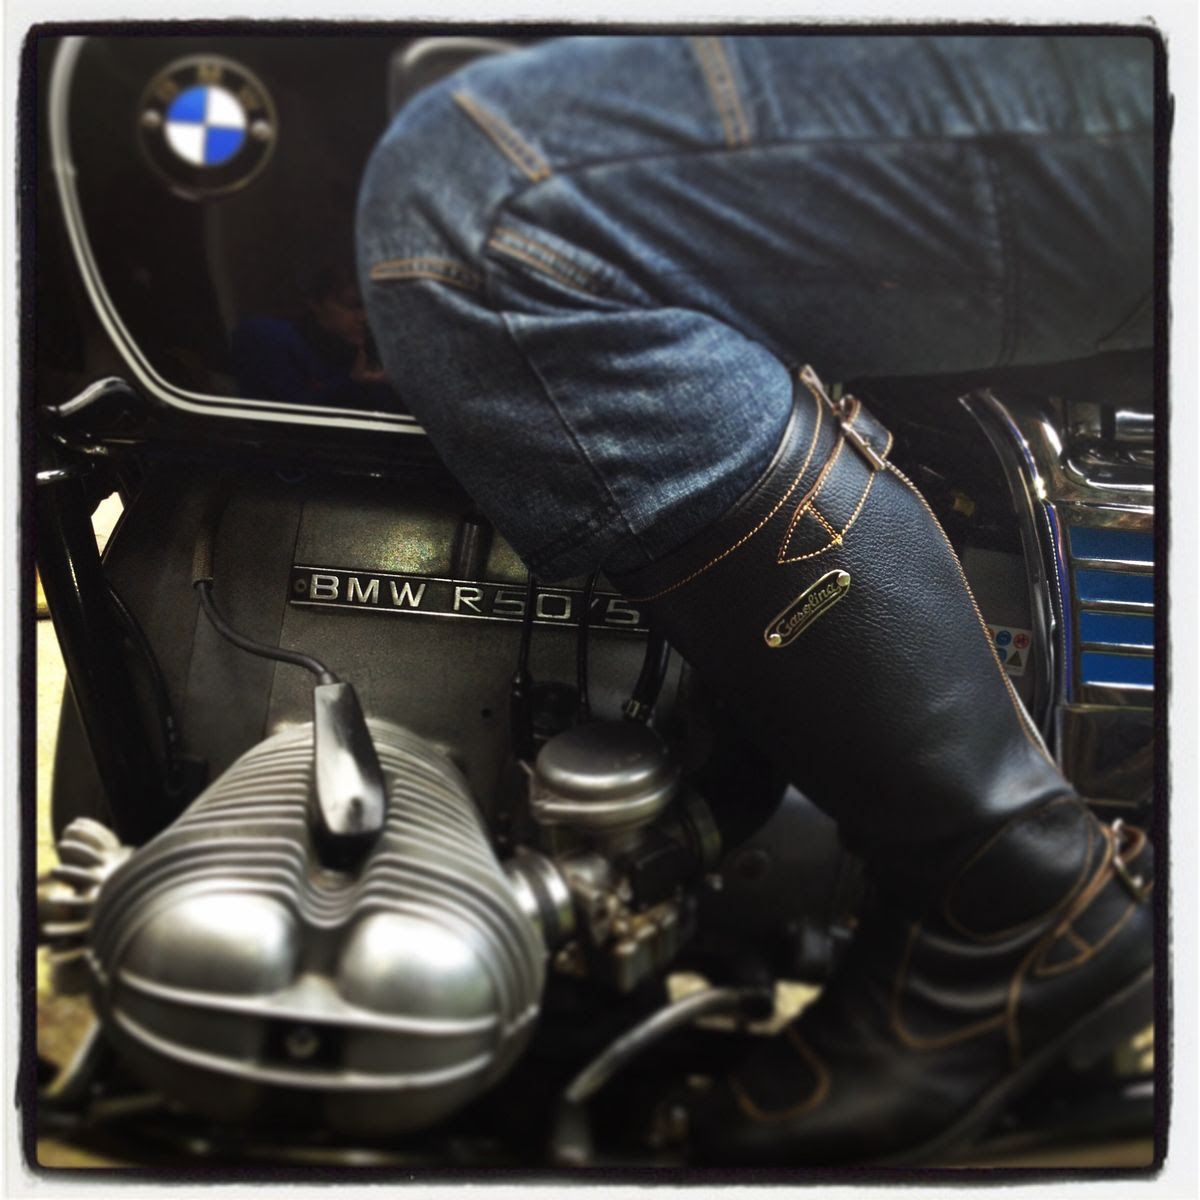 Motorcycle outfit, Cool bike accessories, Bmw motorcycle